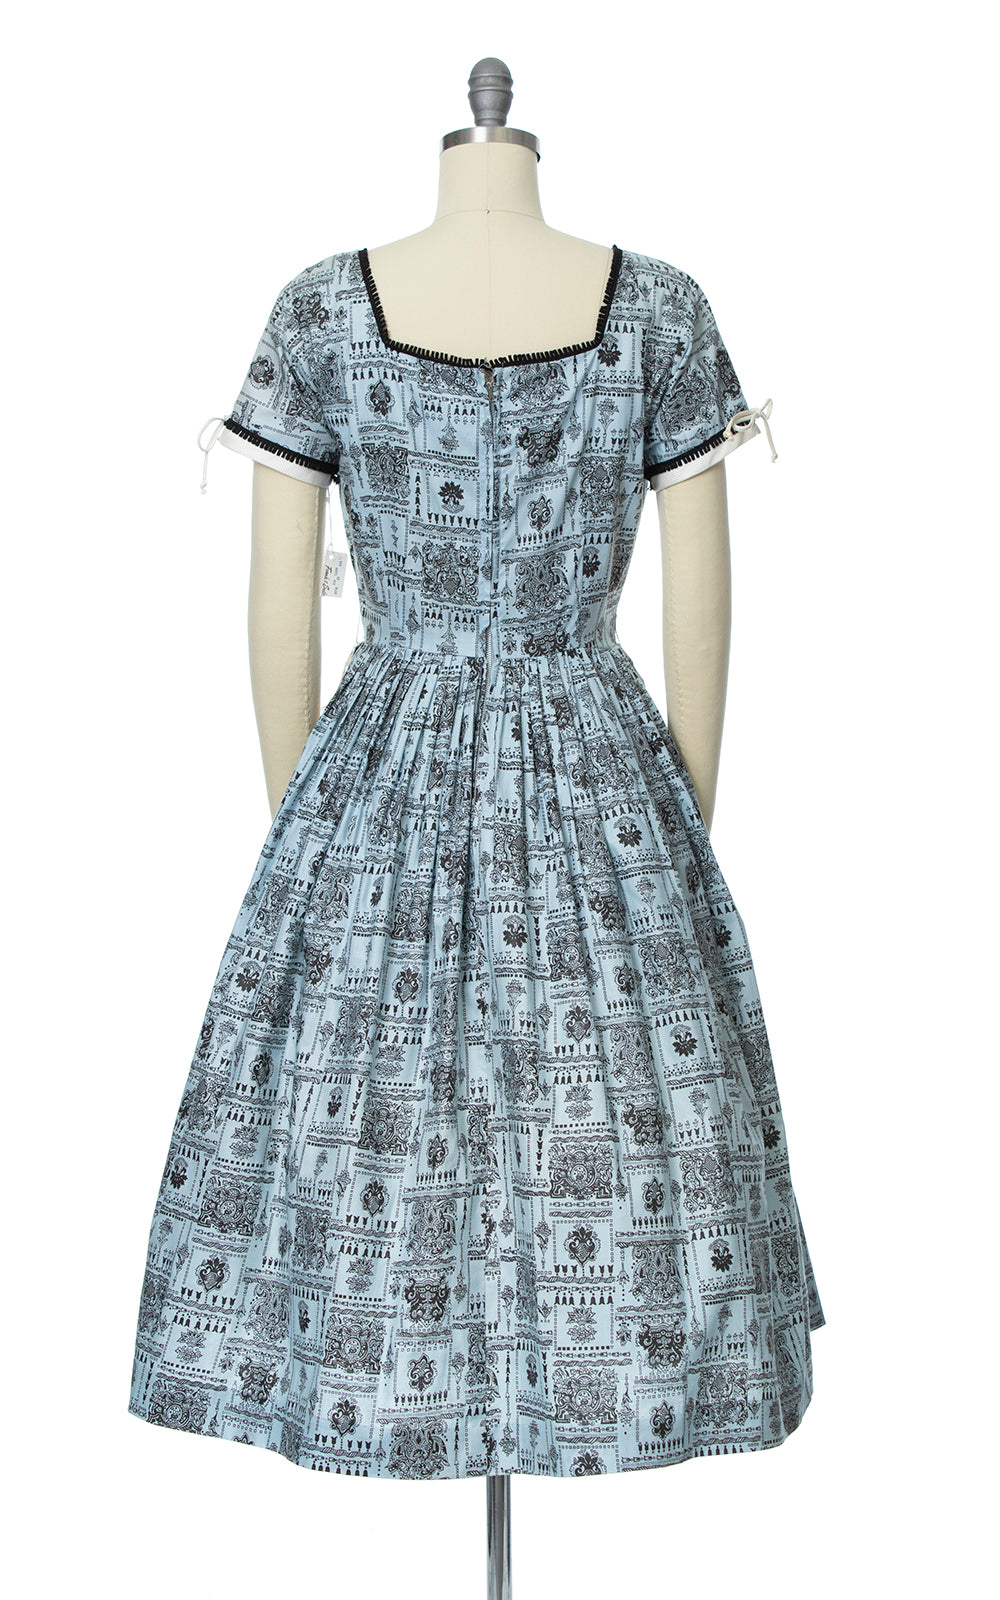 Vintage 1950s Novelty Printed Cotton Blue Dress Deadstock with Tags Birthday Life Vintage